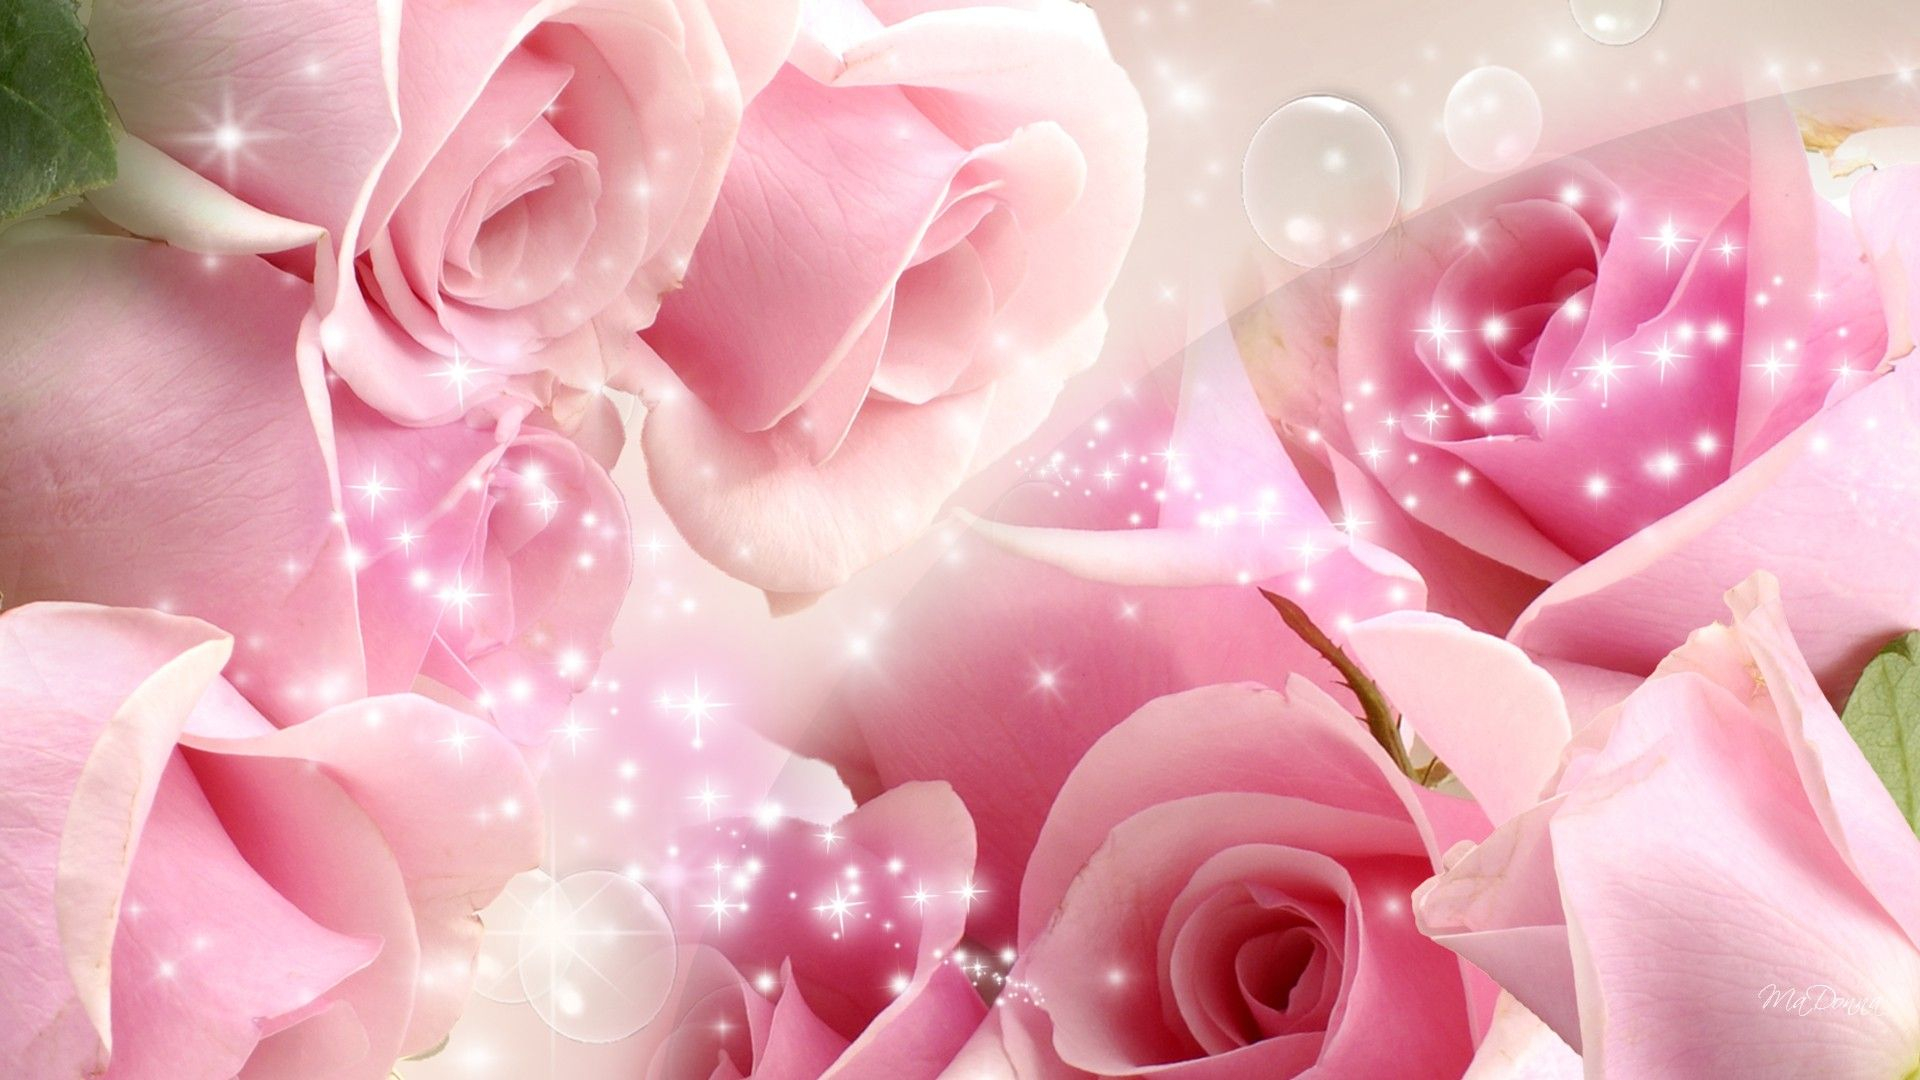 1920x1080 Most Beautiful Pink Roses Wallpaper | Pink flowers wallpaper, Rose wallpaper, Pink flowers background